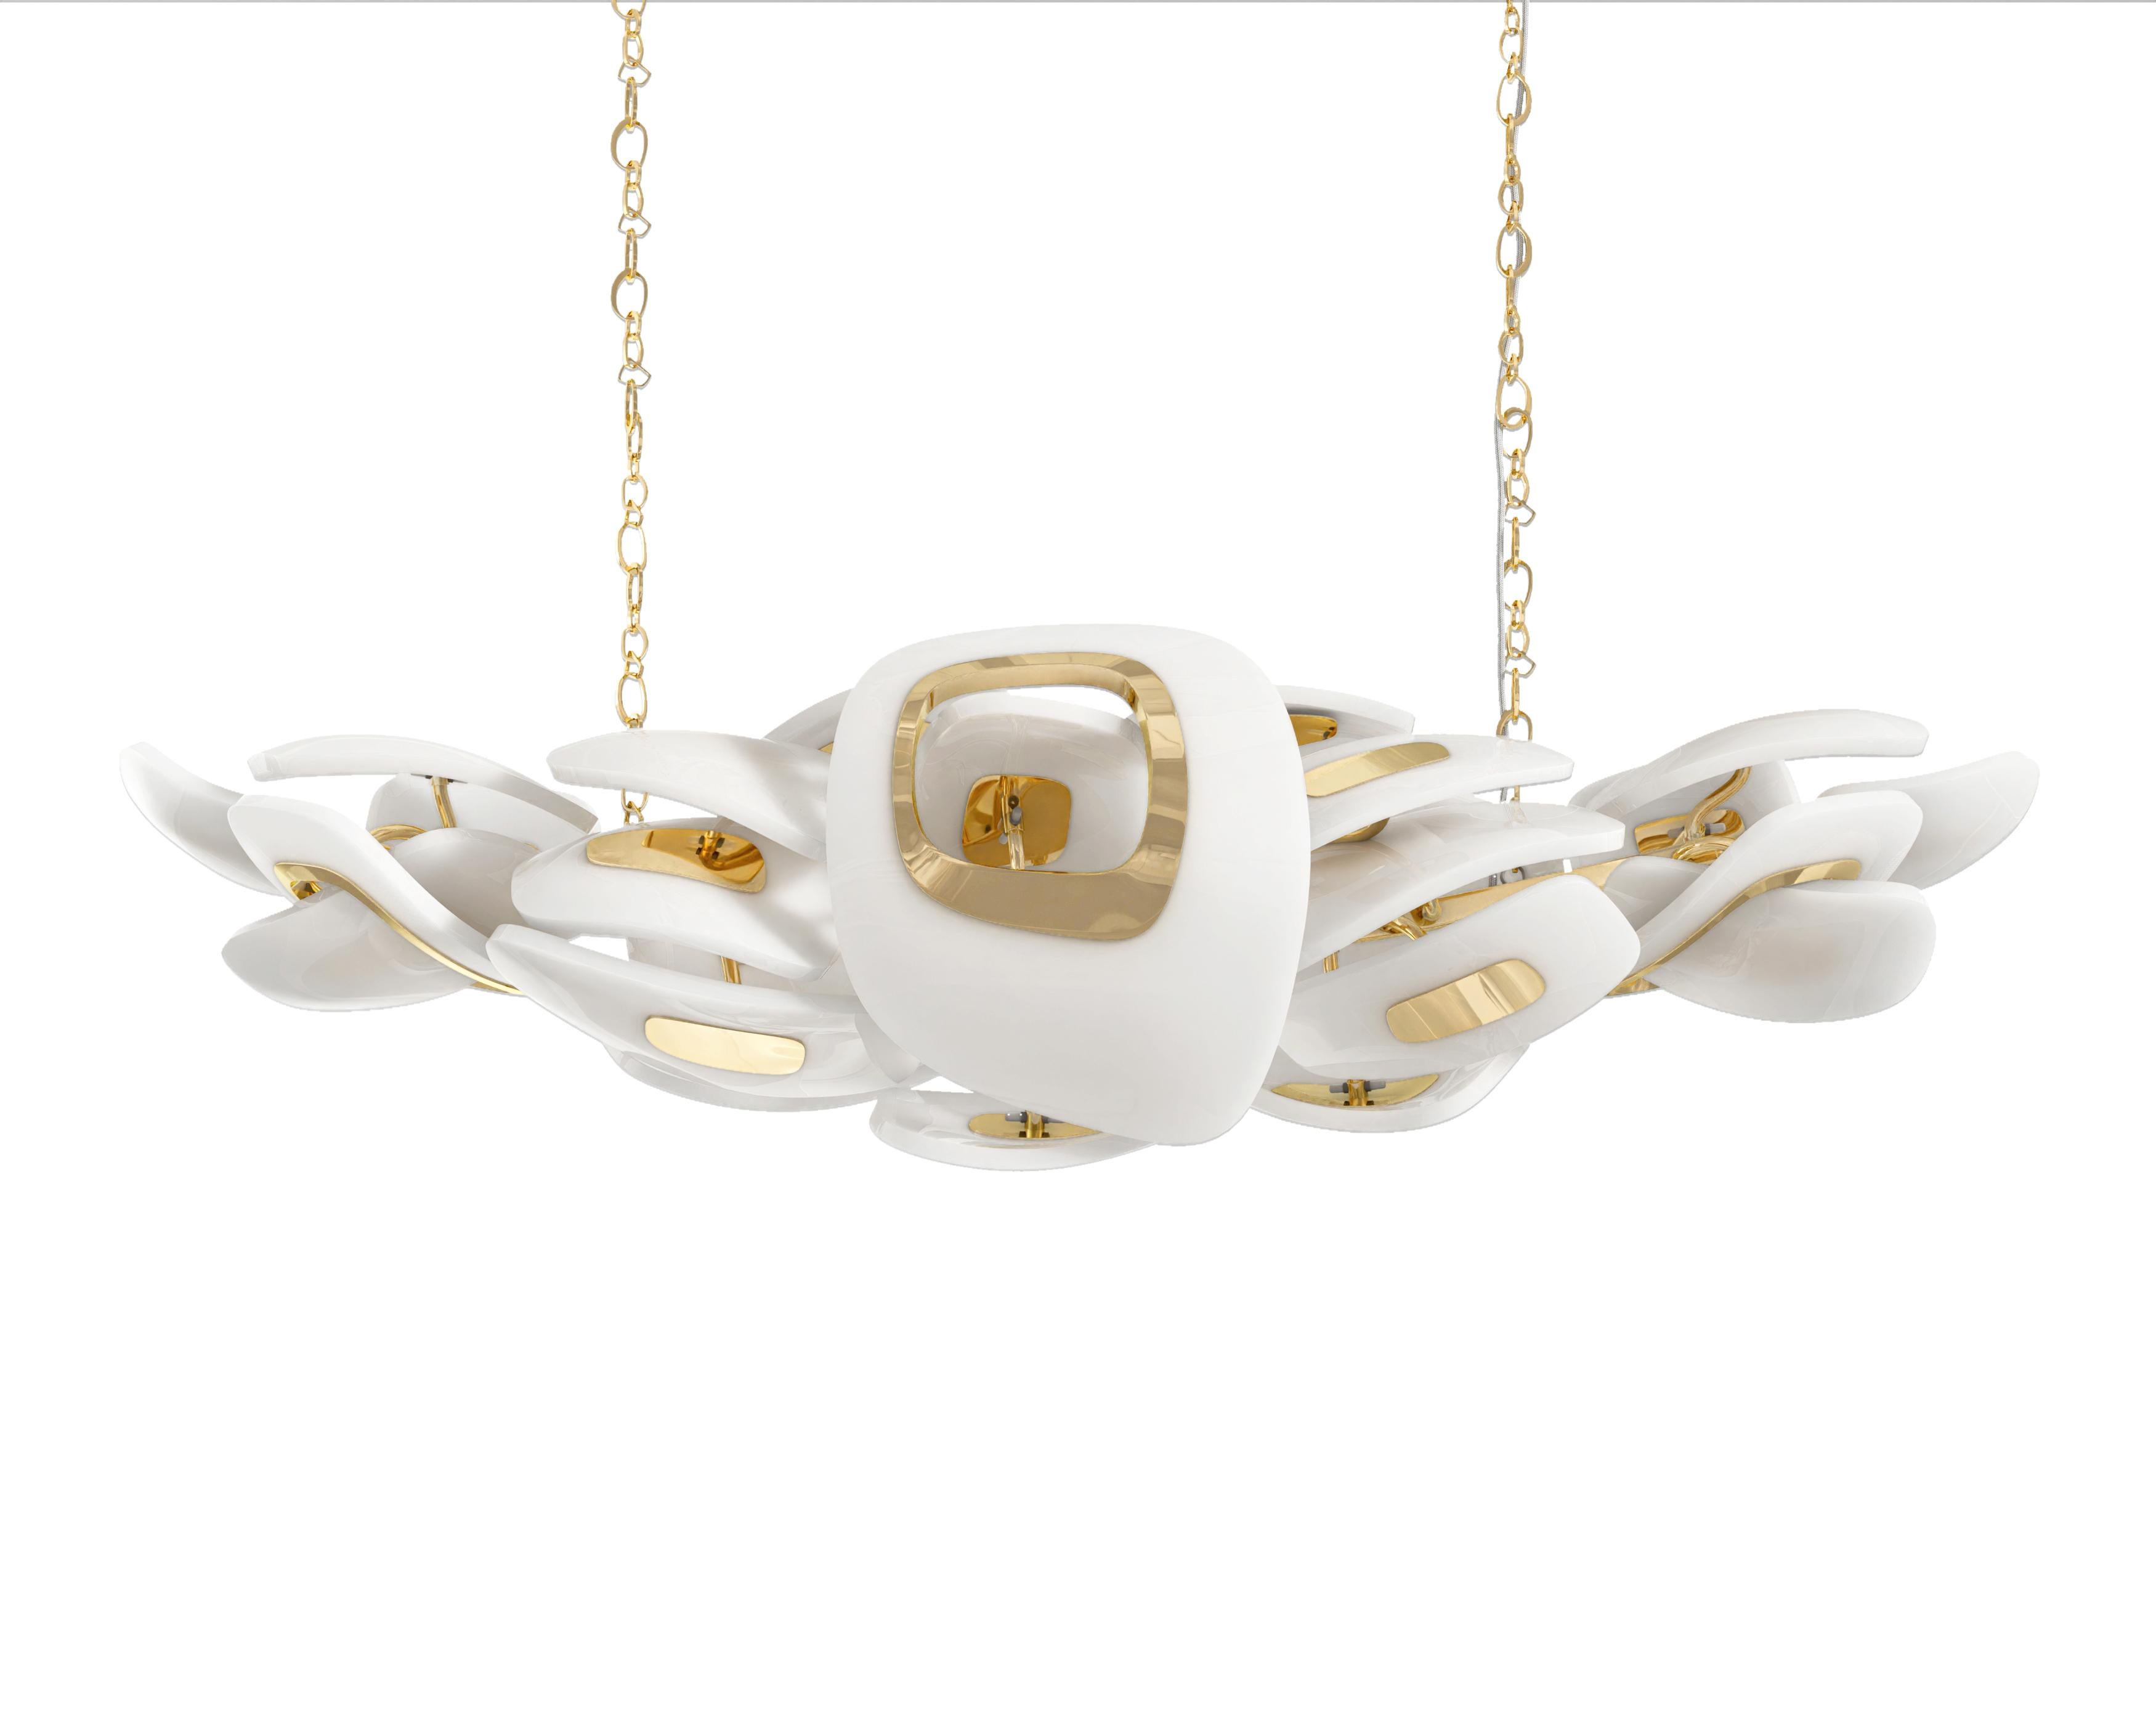 Swan Horizontal Chandelier in Polished Bronze and Murano Glass by Palena For Sale